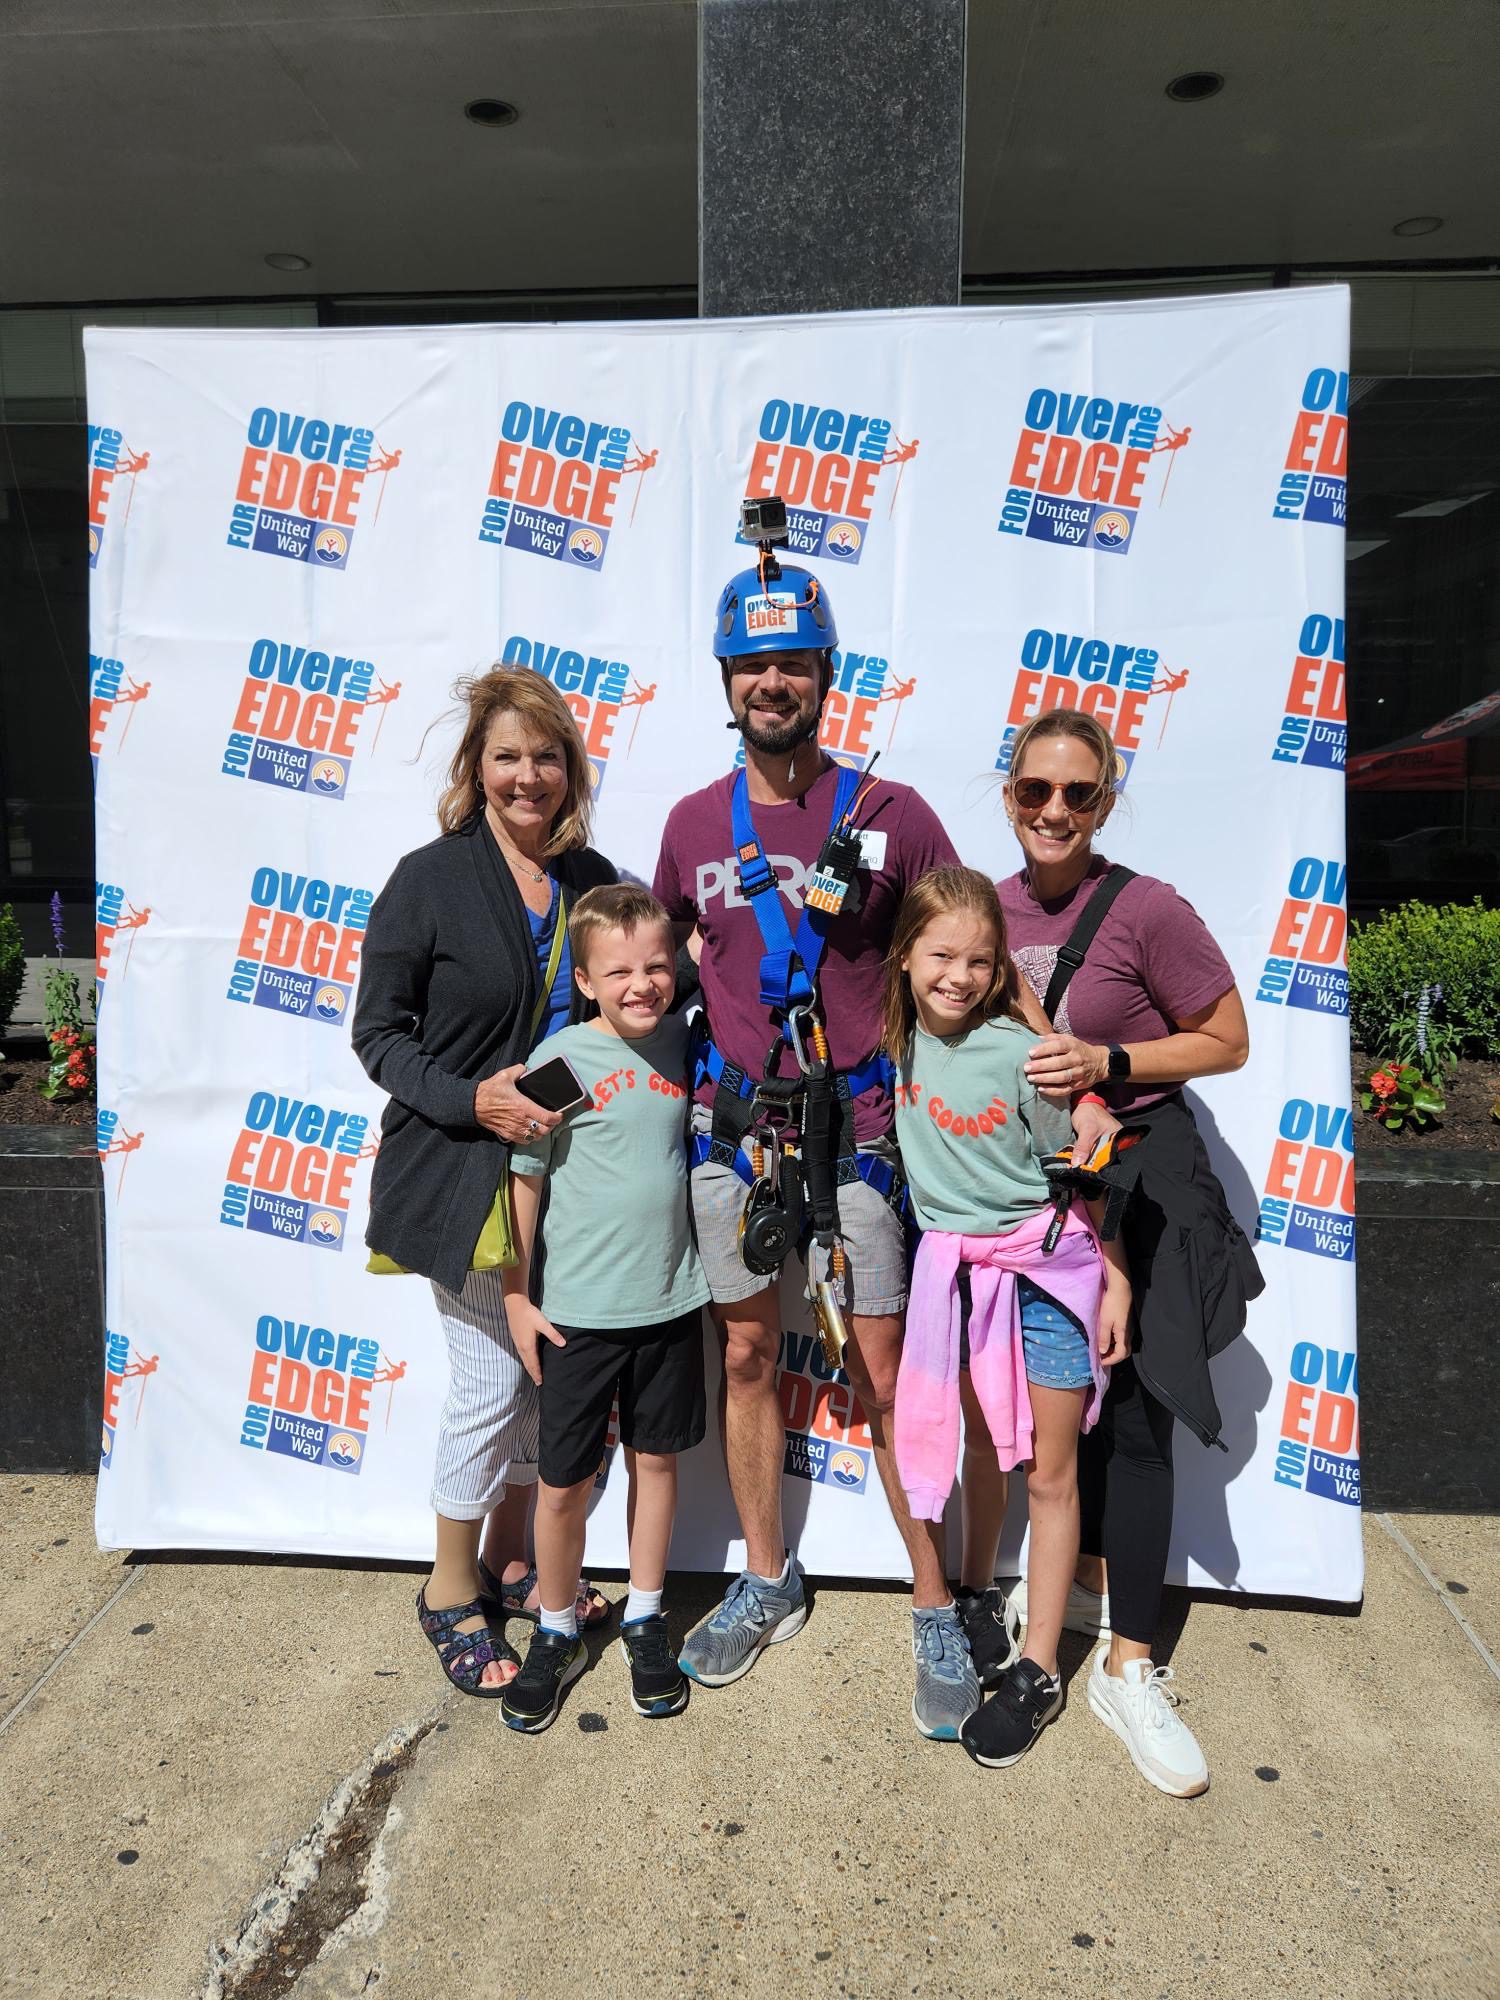 An image of Scott Hill, co-founder & CEO of PERQ, participating in the Over the Edge community event by United Way